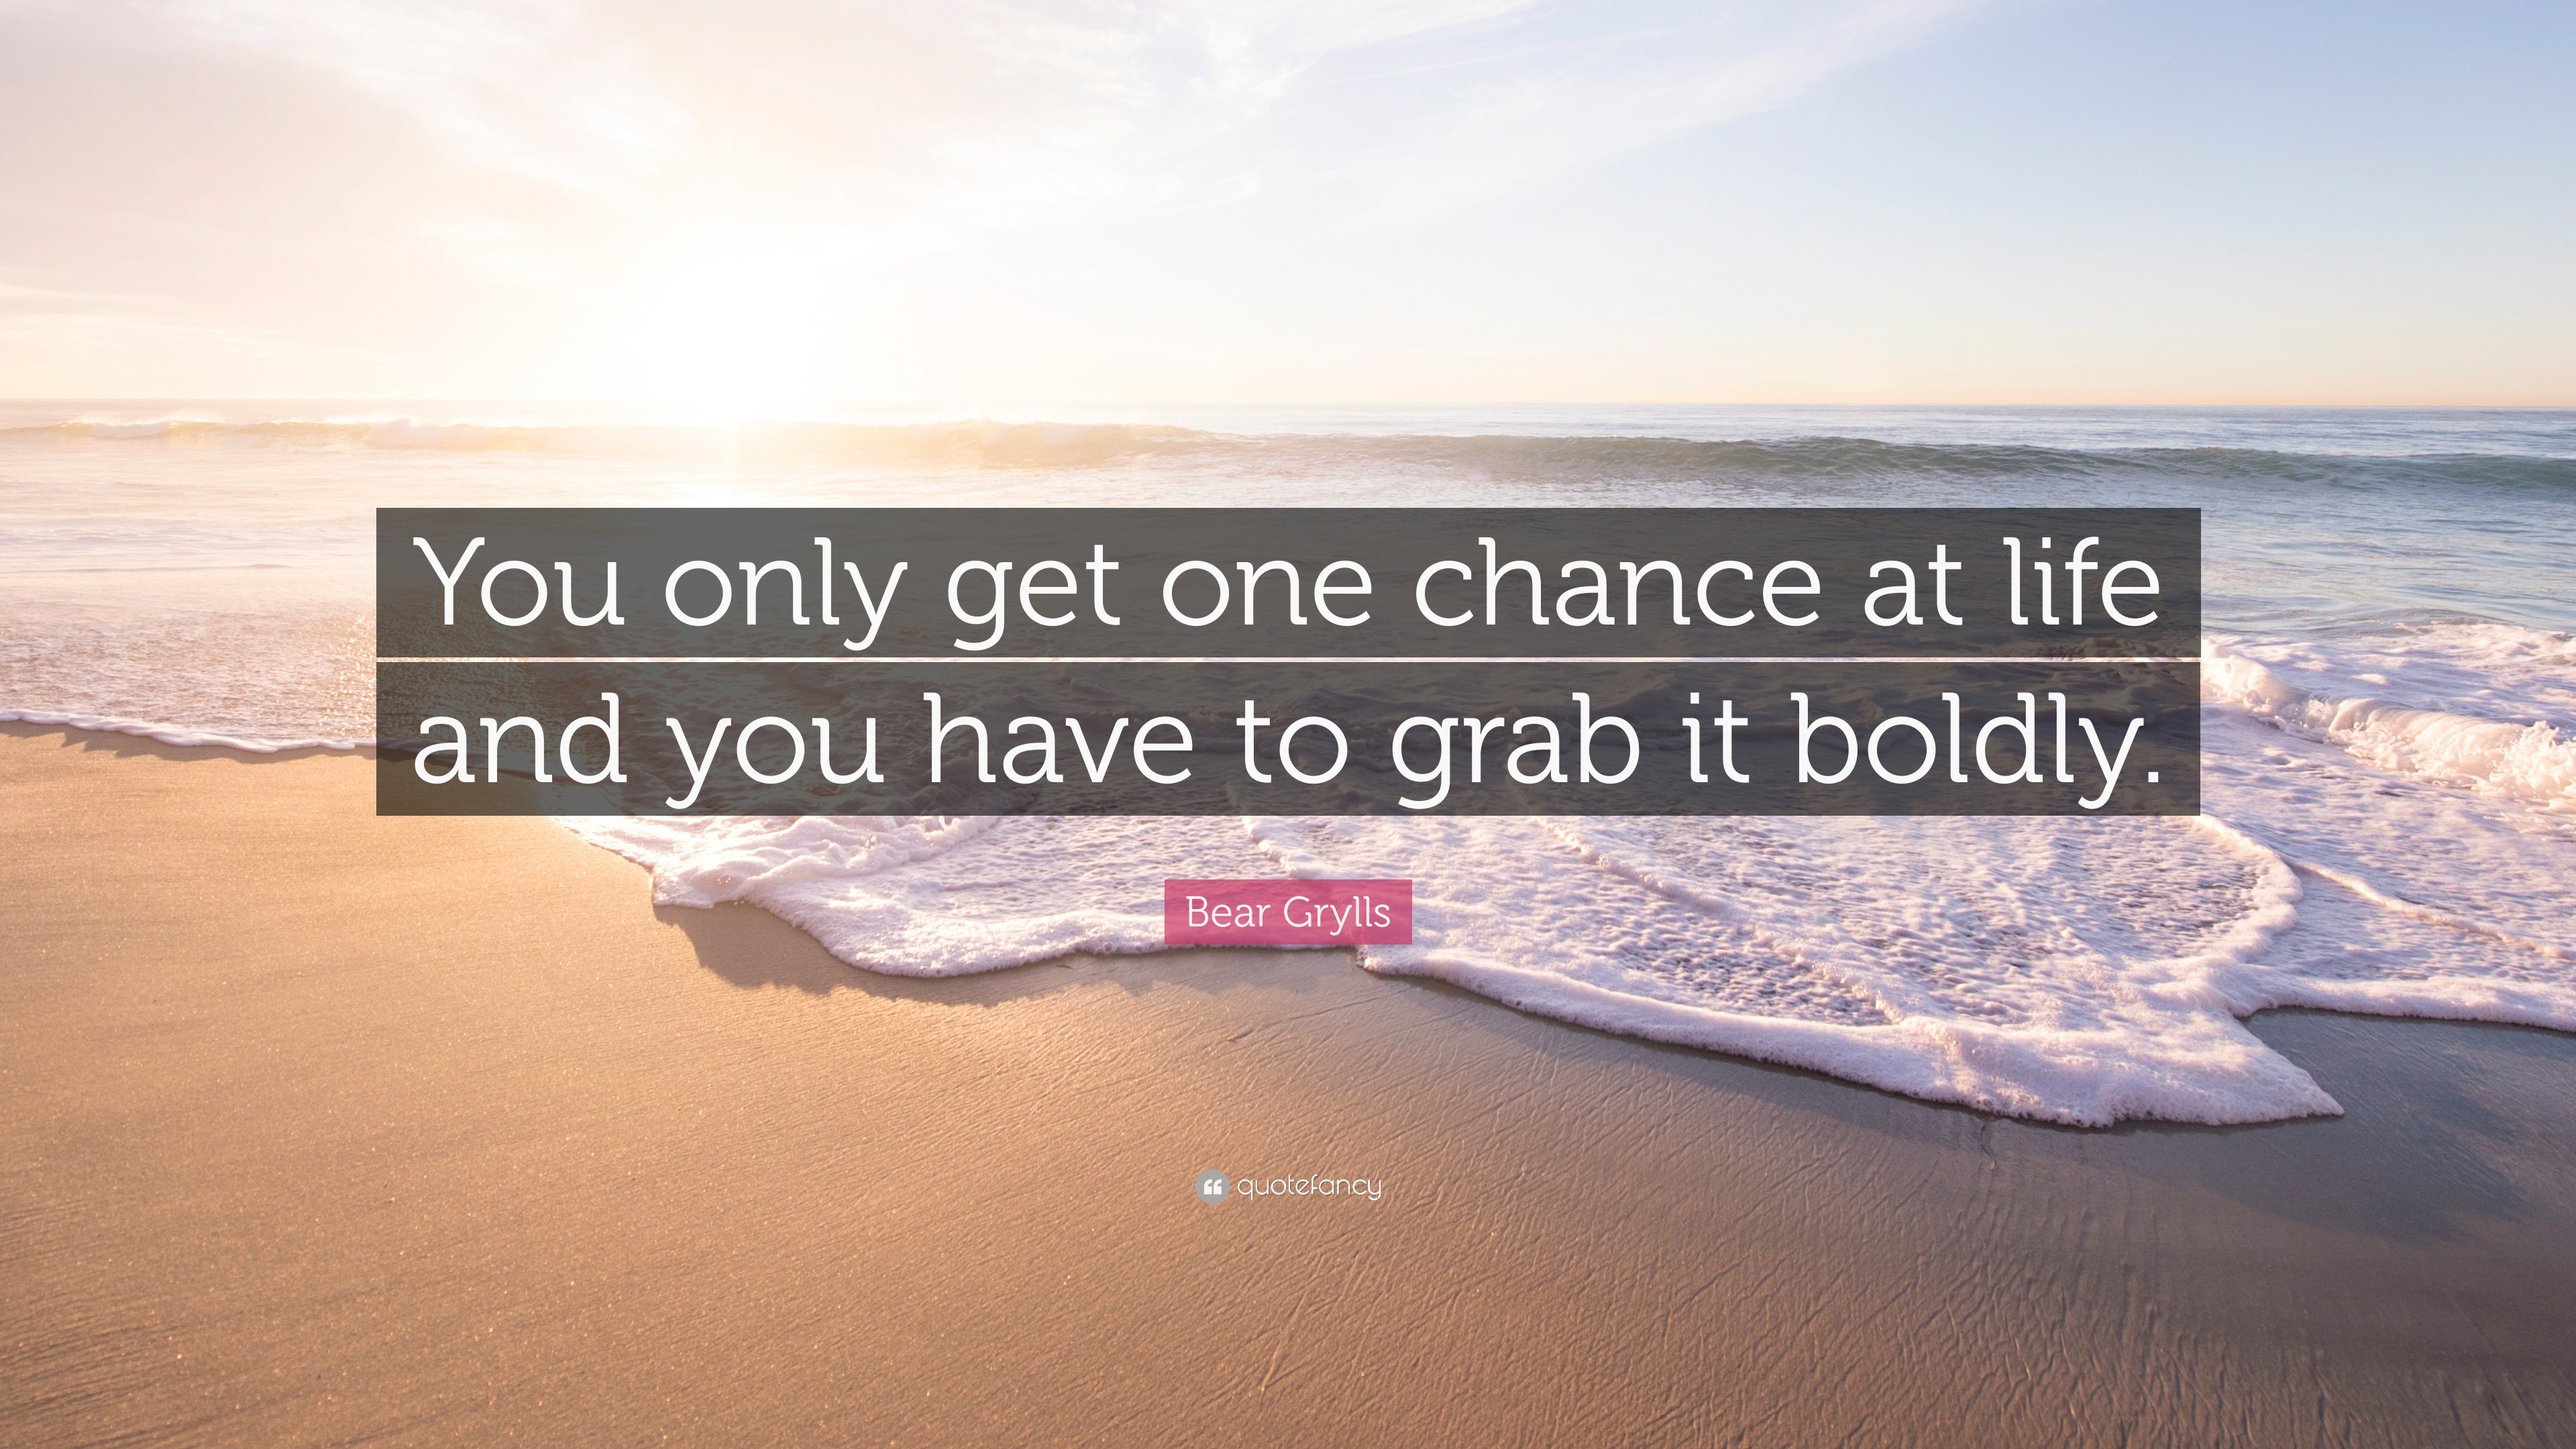 Bear Grylls Quote “You only one chance at life and you have to